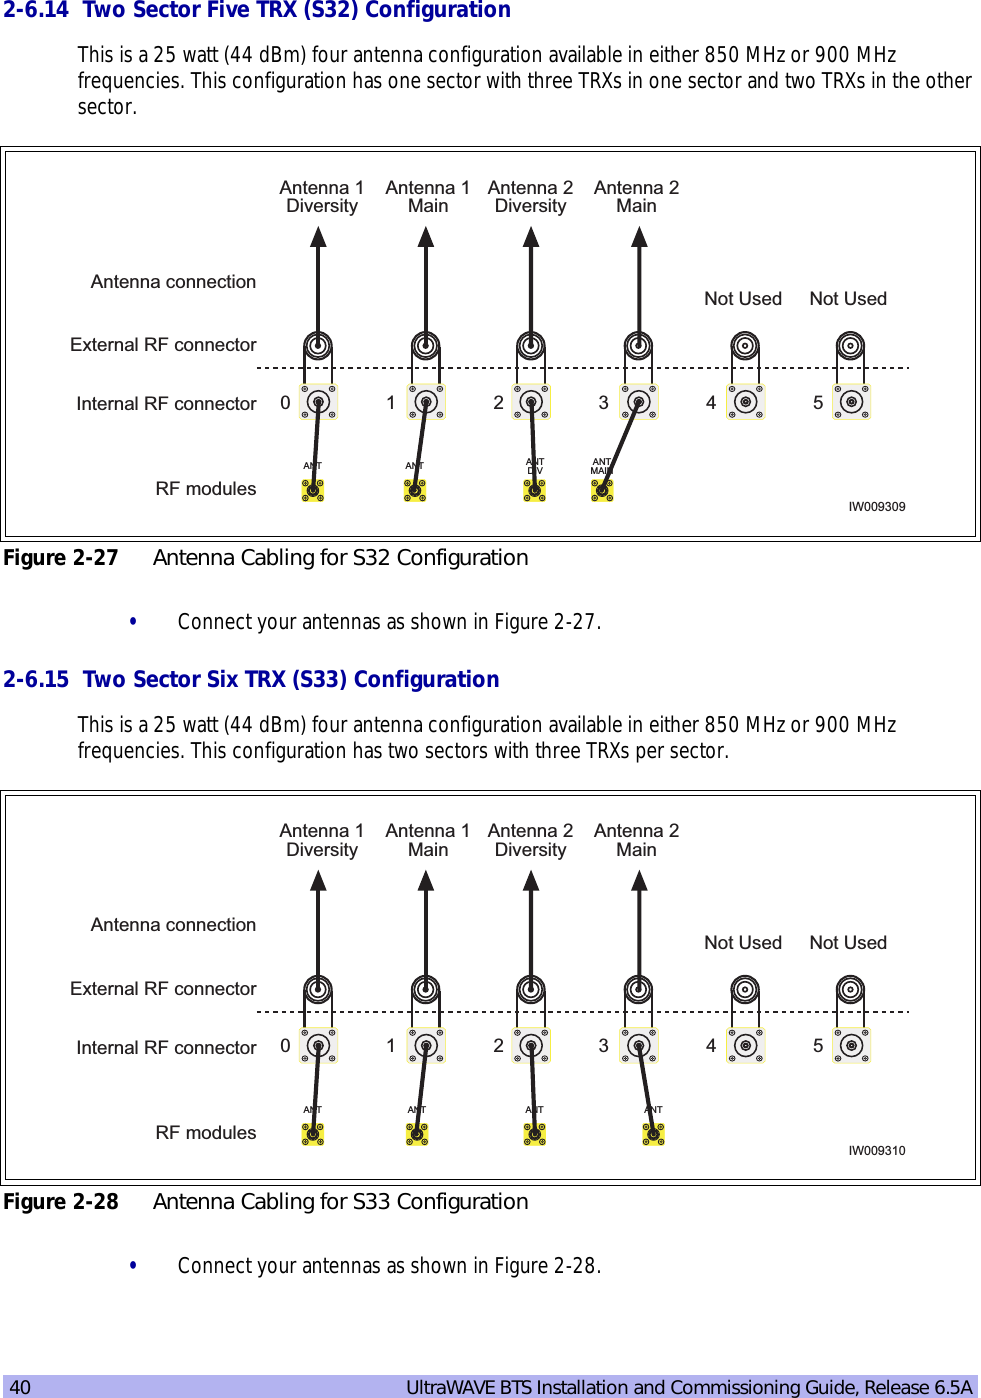 40   UltraWAVE BTS Installation and Commissioning Guide, Release 6.5A2-6.14  Two Sector Five TRX (S32) ConfigurationThis is a 25 watt (44 dBm) four antenna configuration available in either 850 MHz or 900 MHz frequencies. This configuration has one sector with three TRXs in one sector and two TRXs in the other sector. •Connect your antennas as shown in Figure 2-27.2-6.15  Two Sector Six TRX (S33) ConfigurationThis is a 25 watt (44 dBm) four antenna configuration available in either 850 MHz or 900 MHz frequencies. This configuration has two sectors with three TRXs per sector.•Connect your antennas as shown in Figure 2-28.Figure 2-27 Antenna Cabling for S32 ConfigurationFigure 2-28 Antenna Cabling for S33 ConfigurationANT ANT ANTDIVANTMAINRF modulesIW009309Internal RF connectorExternal RF connectorAntenna 1DiversityAntenna connection1 2 3 4 50Not Used Not UsedAntenna 1MainAntenna 2MainAntenna 2DiversityANT ANTANT ANTRF modulesIW009310Internal RF connectorExternal RF connectorAntenna 1DiversityAntenna connection1 2 3 4 50Not Used Not UsedAntenna 1MainAntenna 2MainAntenna 2Diversity